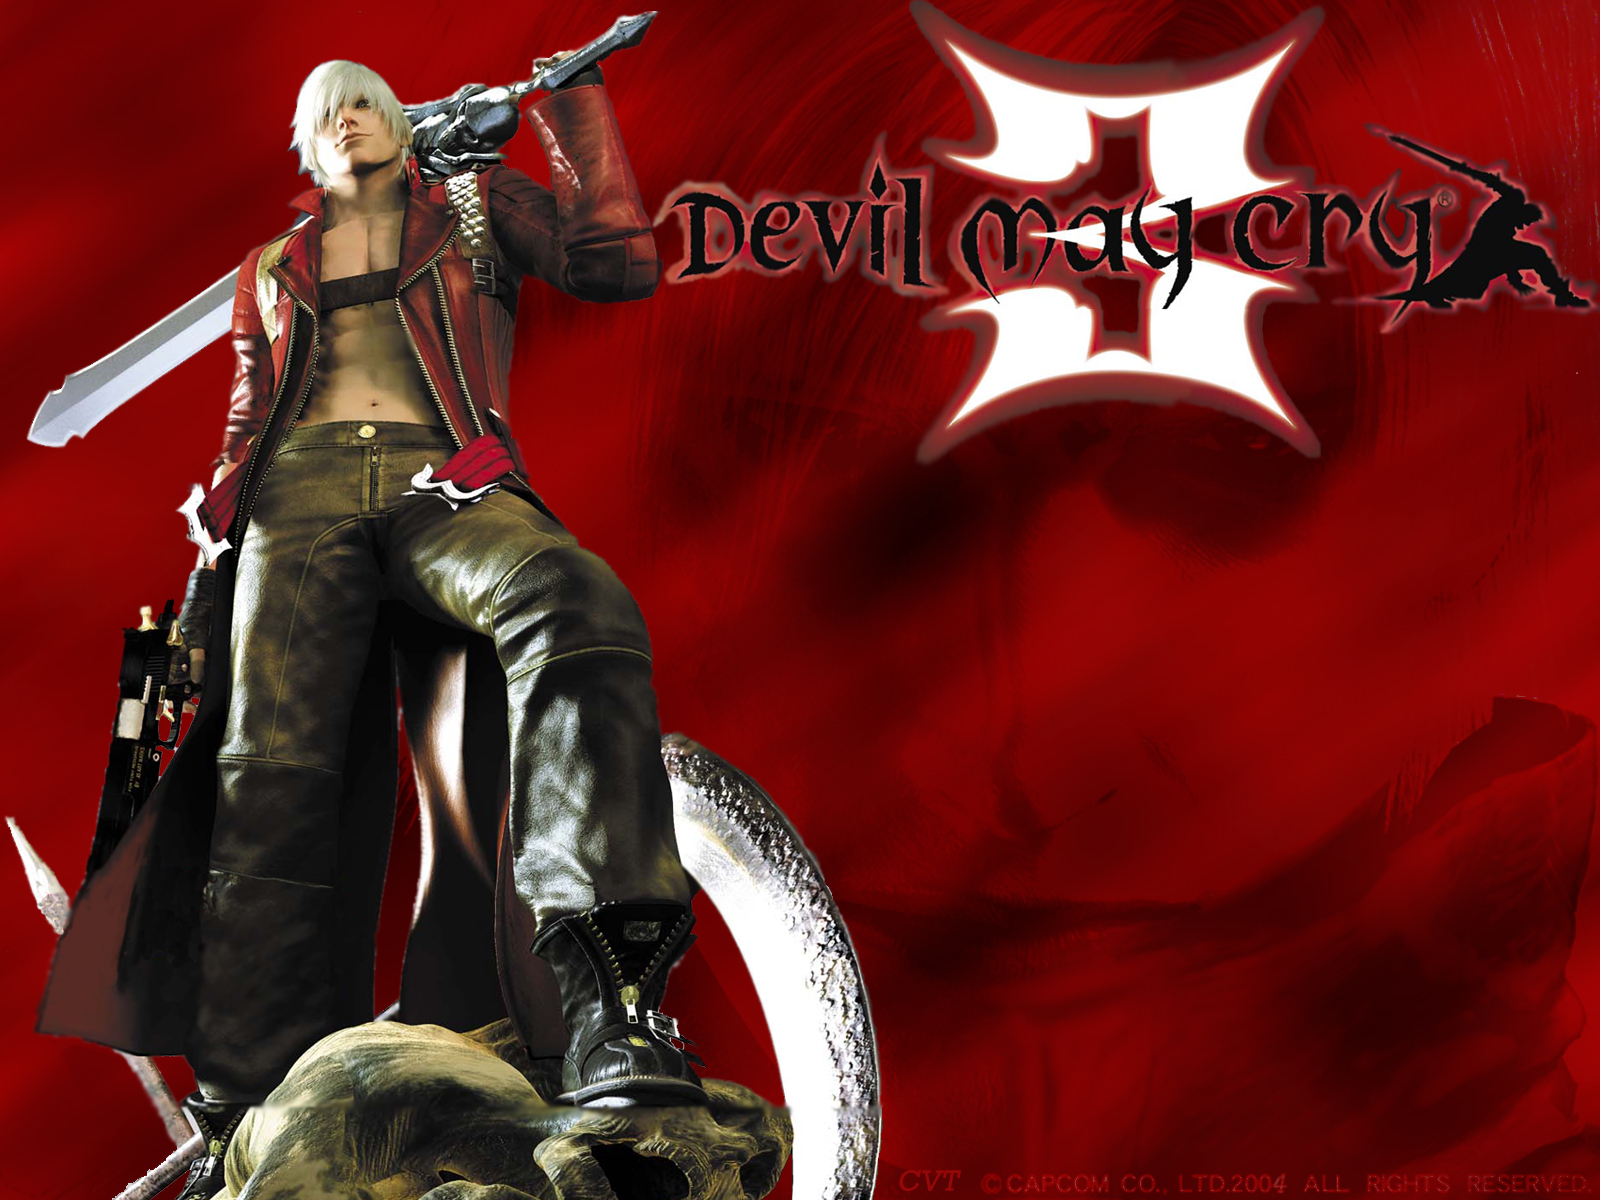 Dante-Devil-May-Cry-3-devil-may-cry-3-10480515-1600-1200.jpg